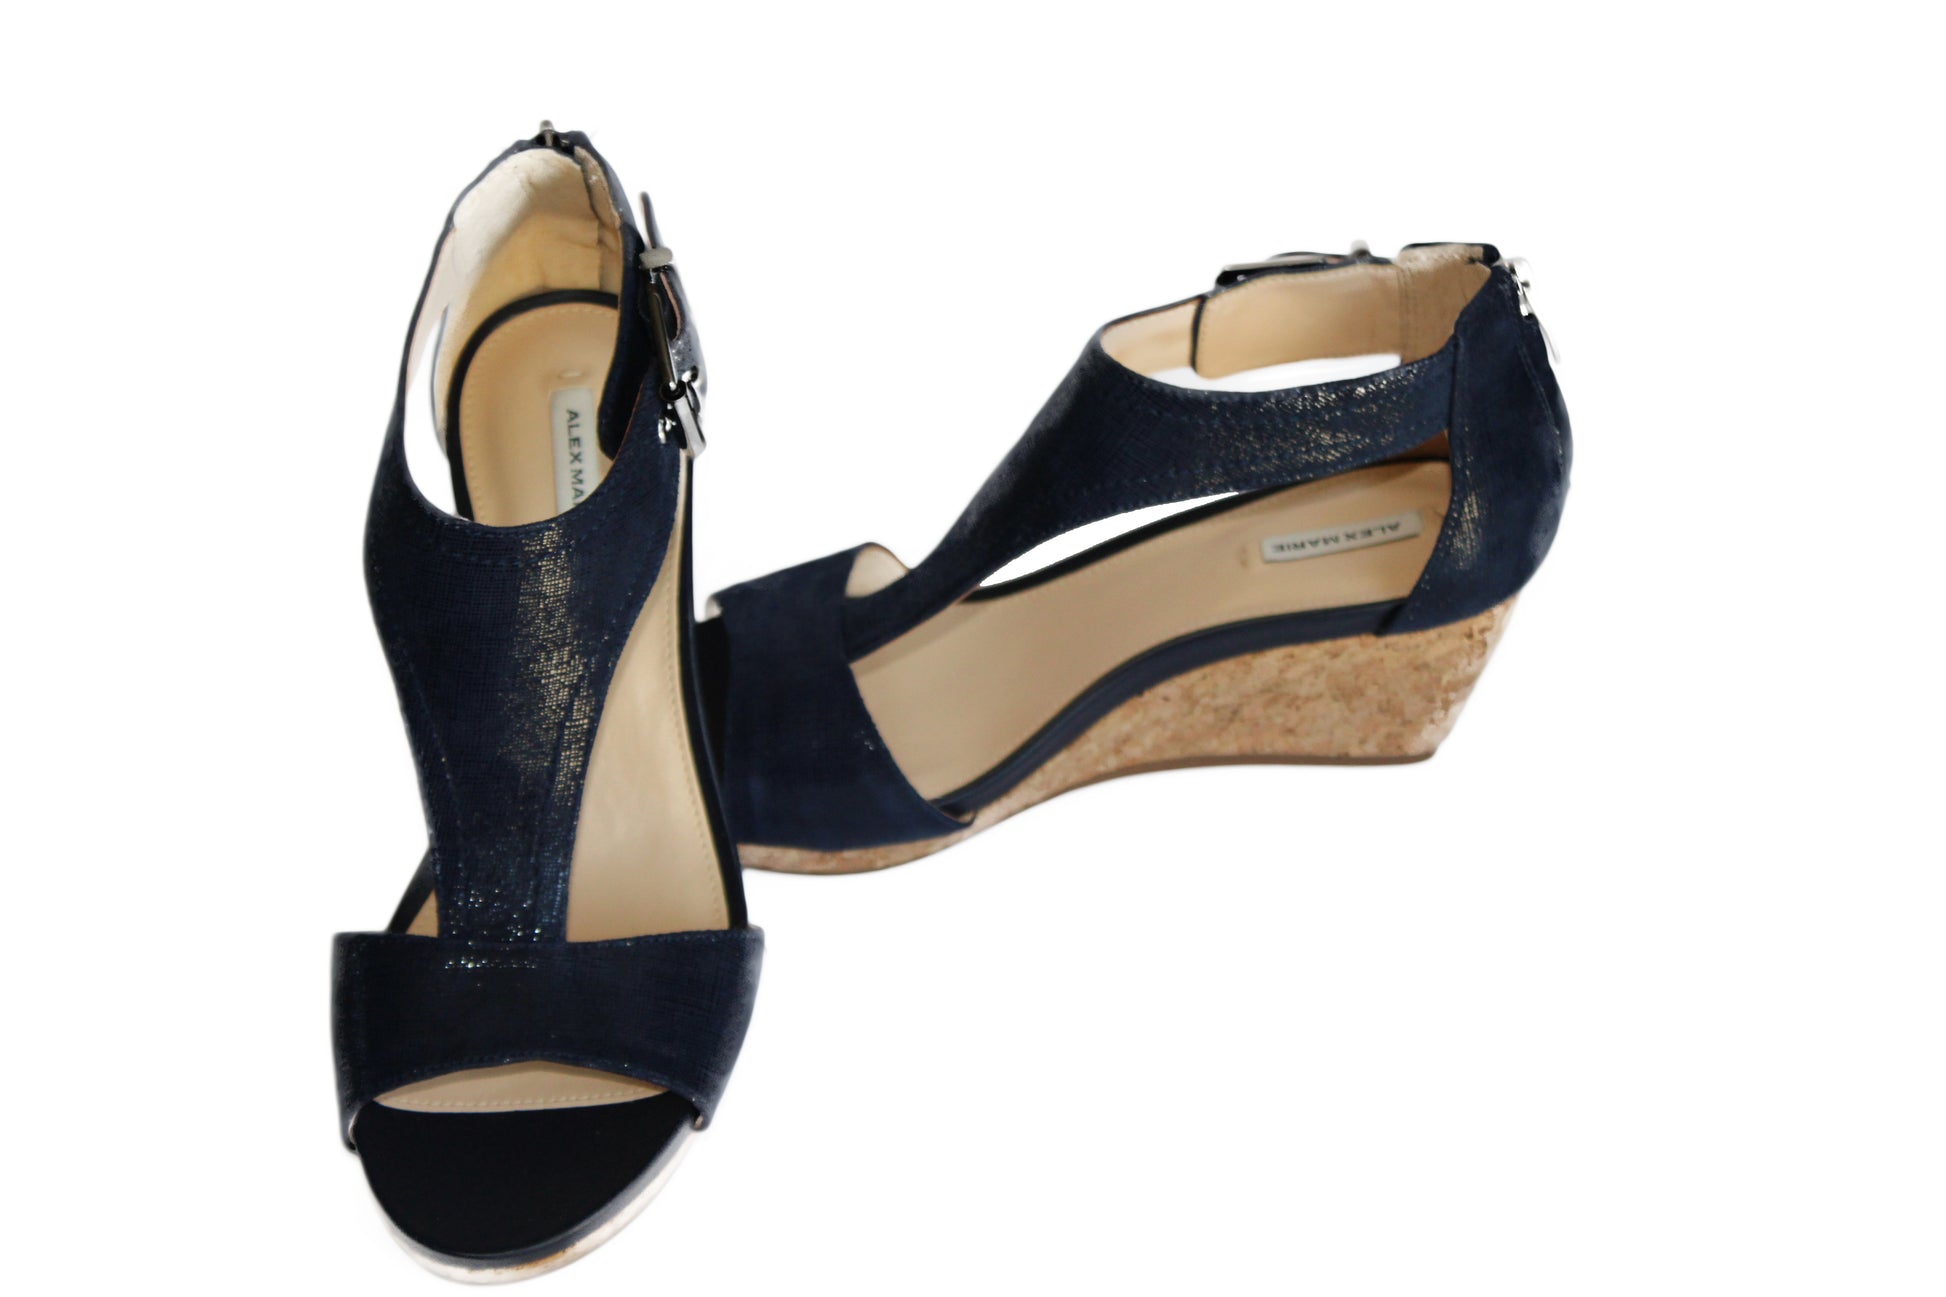 feature leather upper, adjustable buckled ankle strap closure, synthetic lining, cushioned footbed, cork platform wedge & rubber outsole. Approx. 2.56 wedge with a 0.39” platform